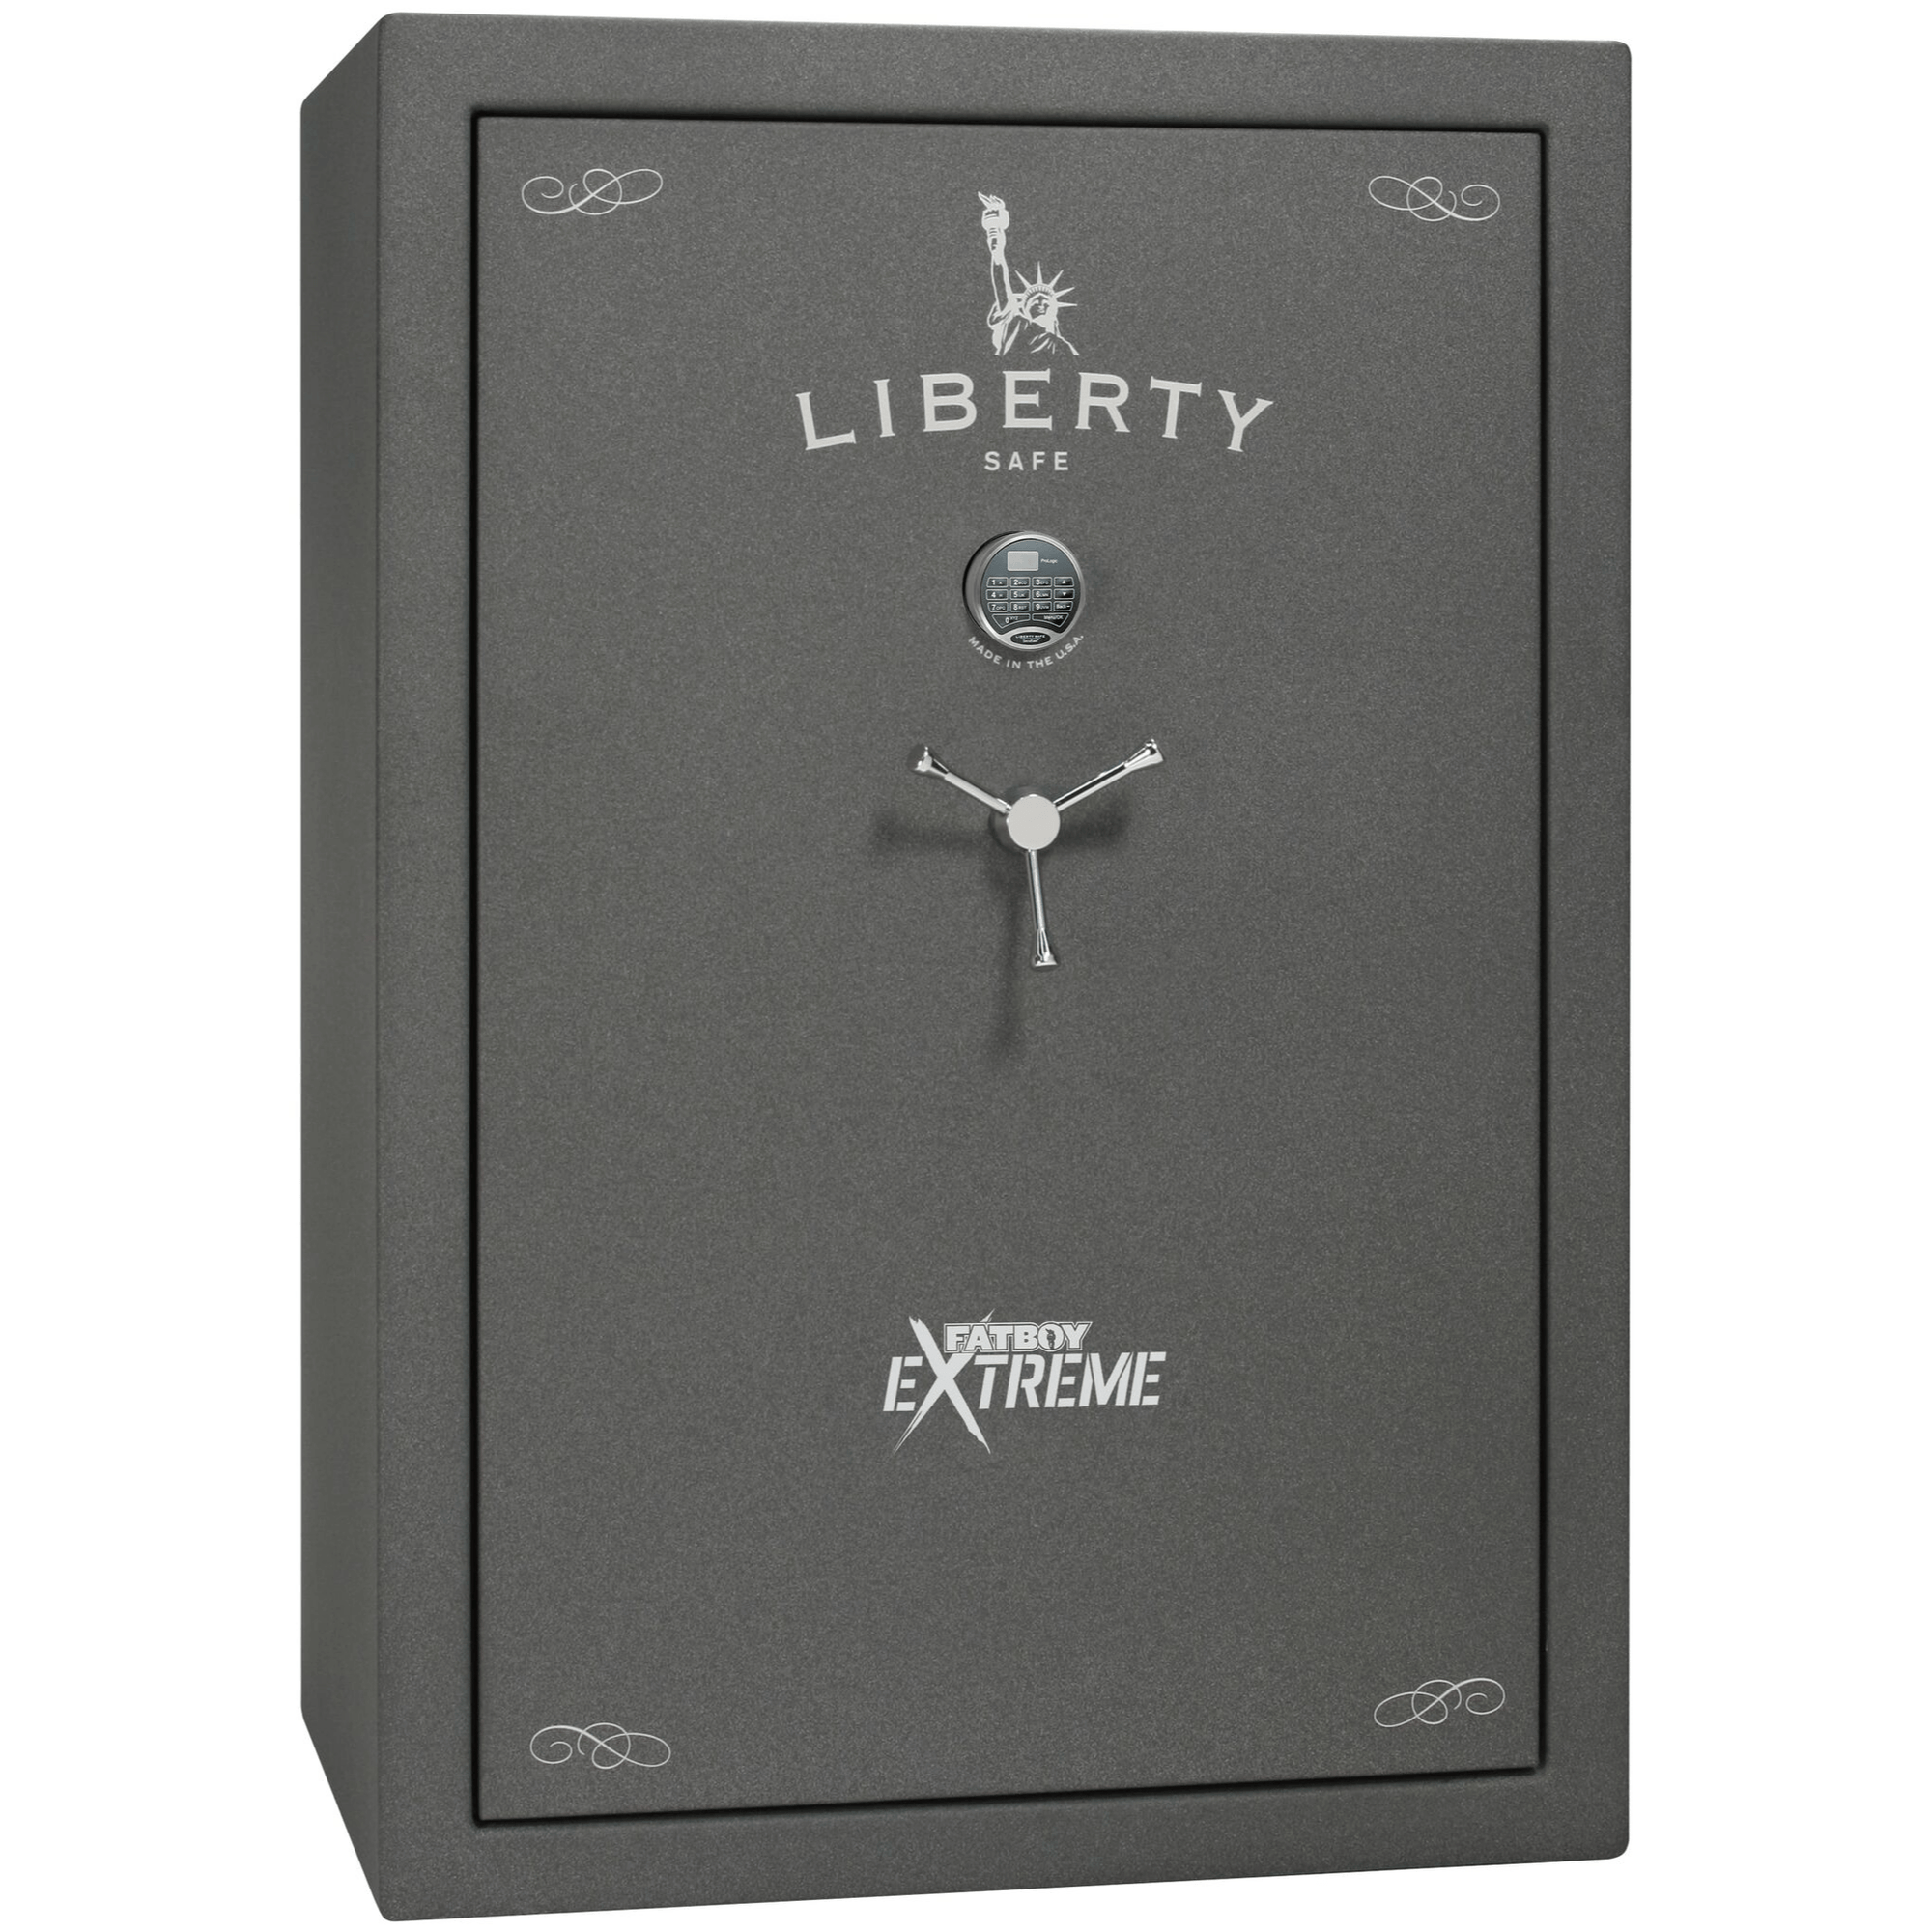 Lincoln Fatboy Extreme 64XT Safe in Textured Granite with Chrome Electronic Lock.